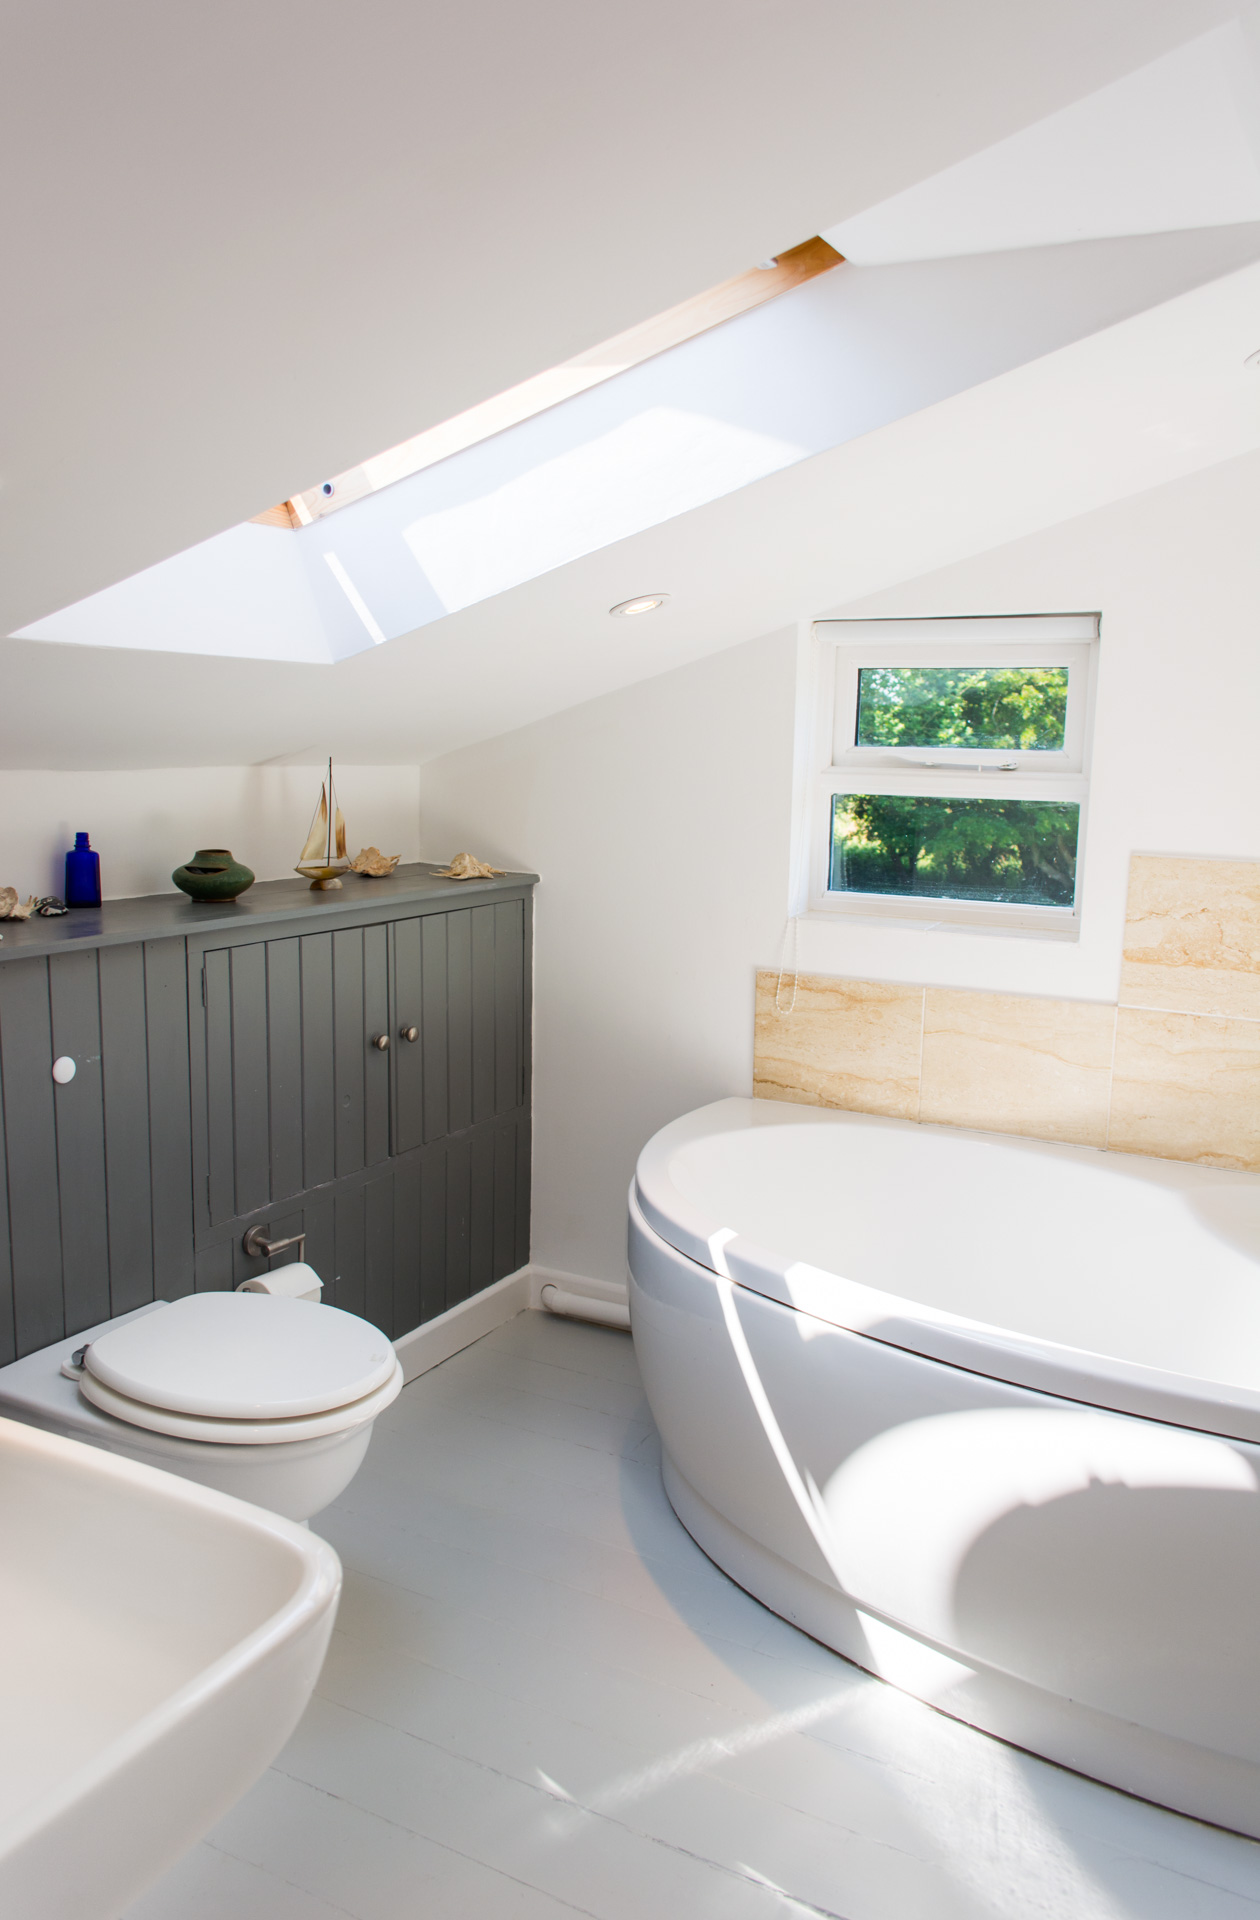 Family bathroom photo showing a large white bath tub and toilet.